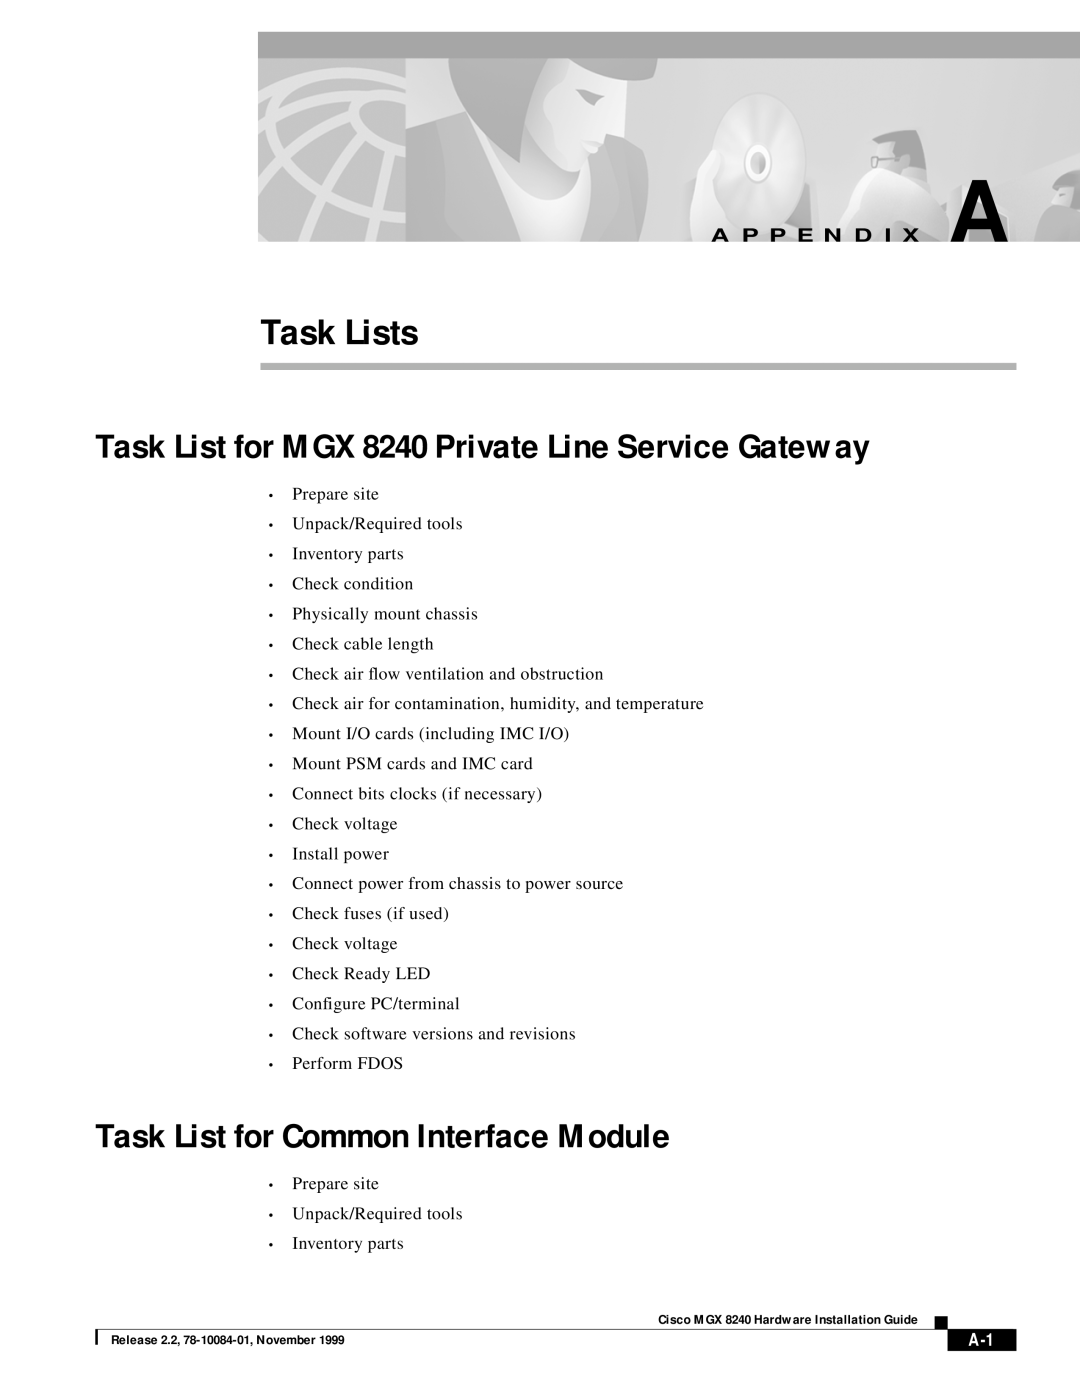 Cisco Systems appendix Task Lists, Task List for MGX 8240 Private Line Service Gateway, A P P E N D I X A 